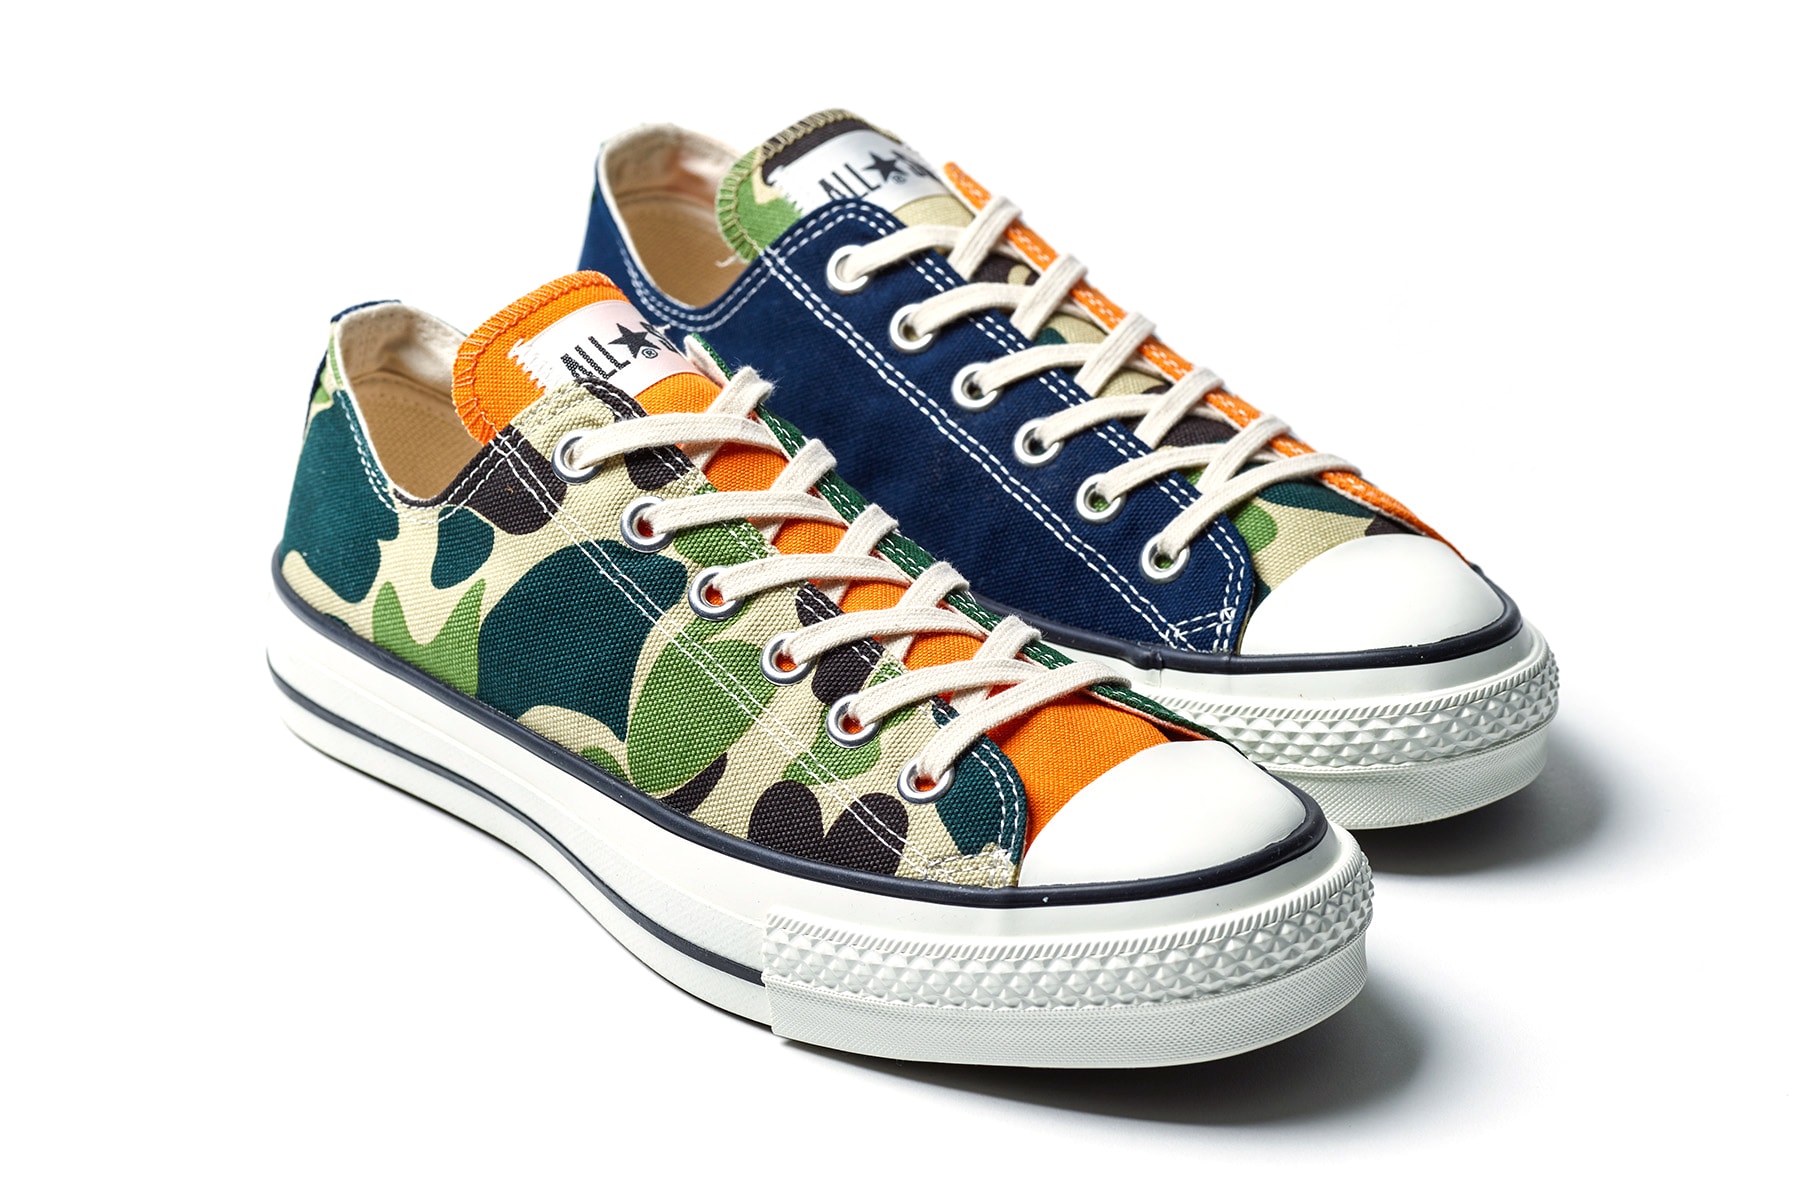 BILLY'S ENT x Converse 全新聯名 Chuck Taylor All Star 鞋款